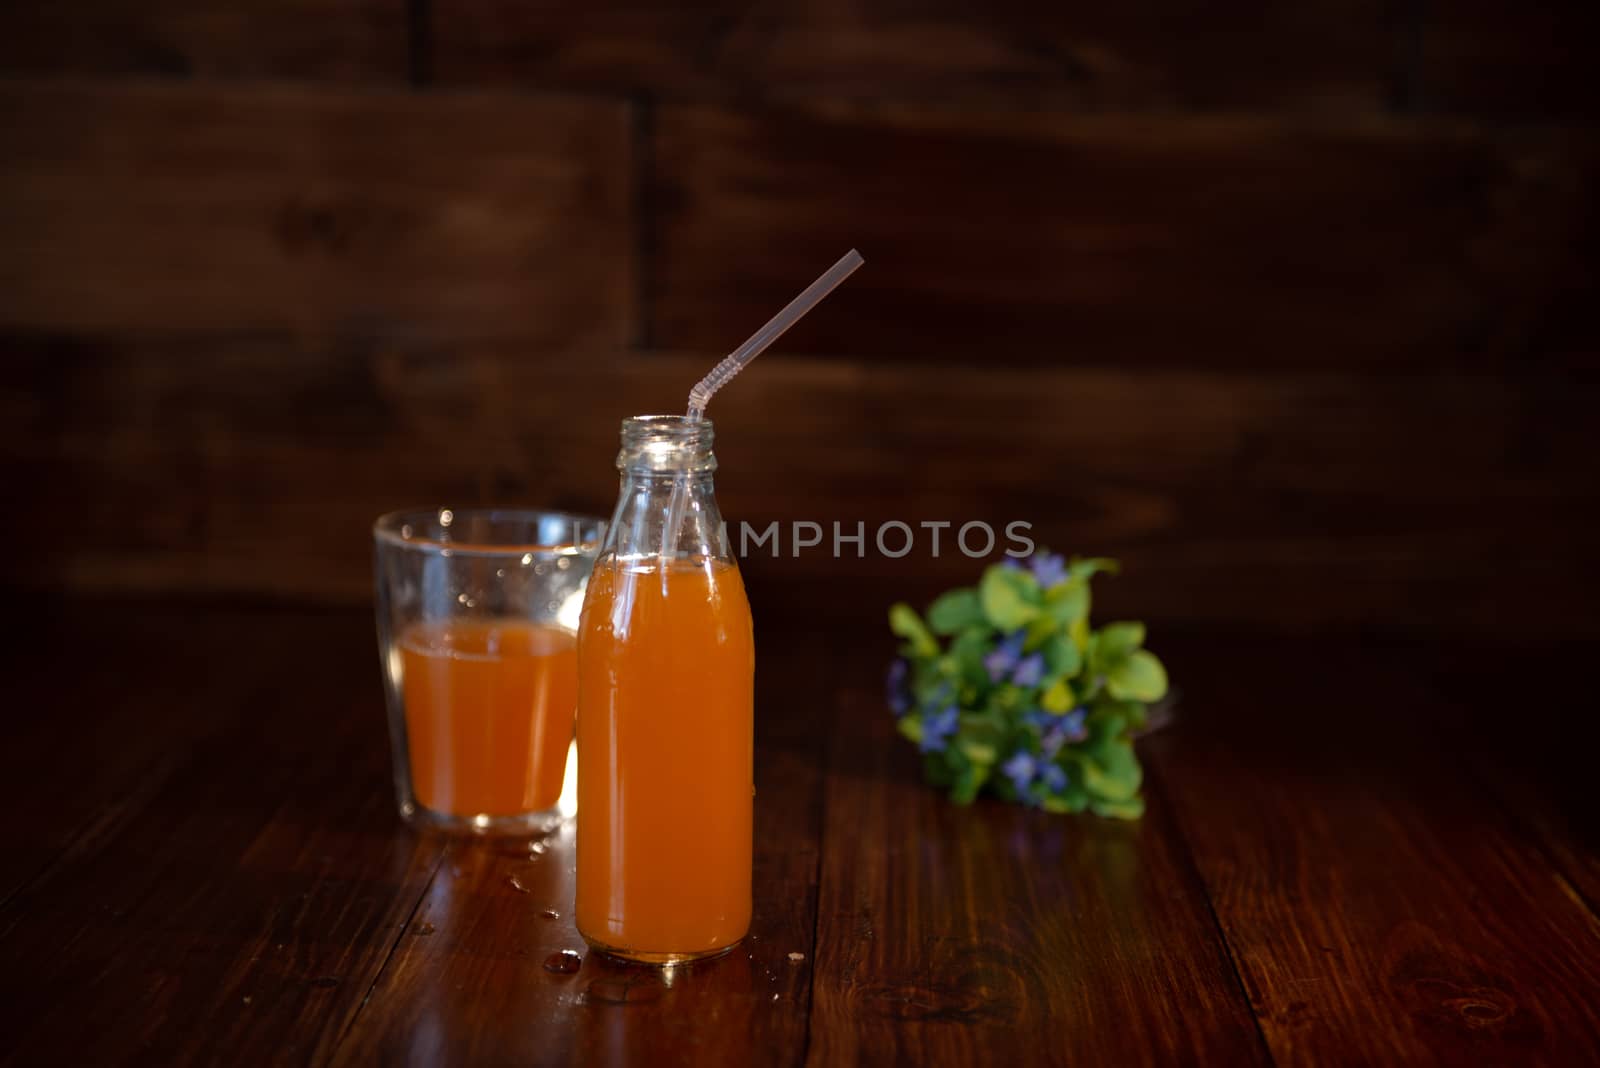 vintage bottle with juice, straw and flowers on wooden table by marynkin